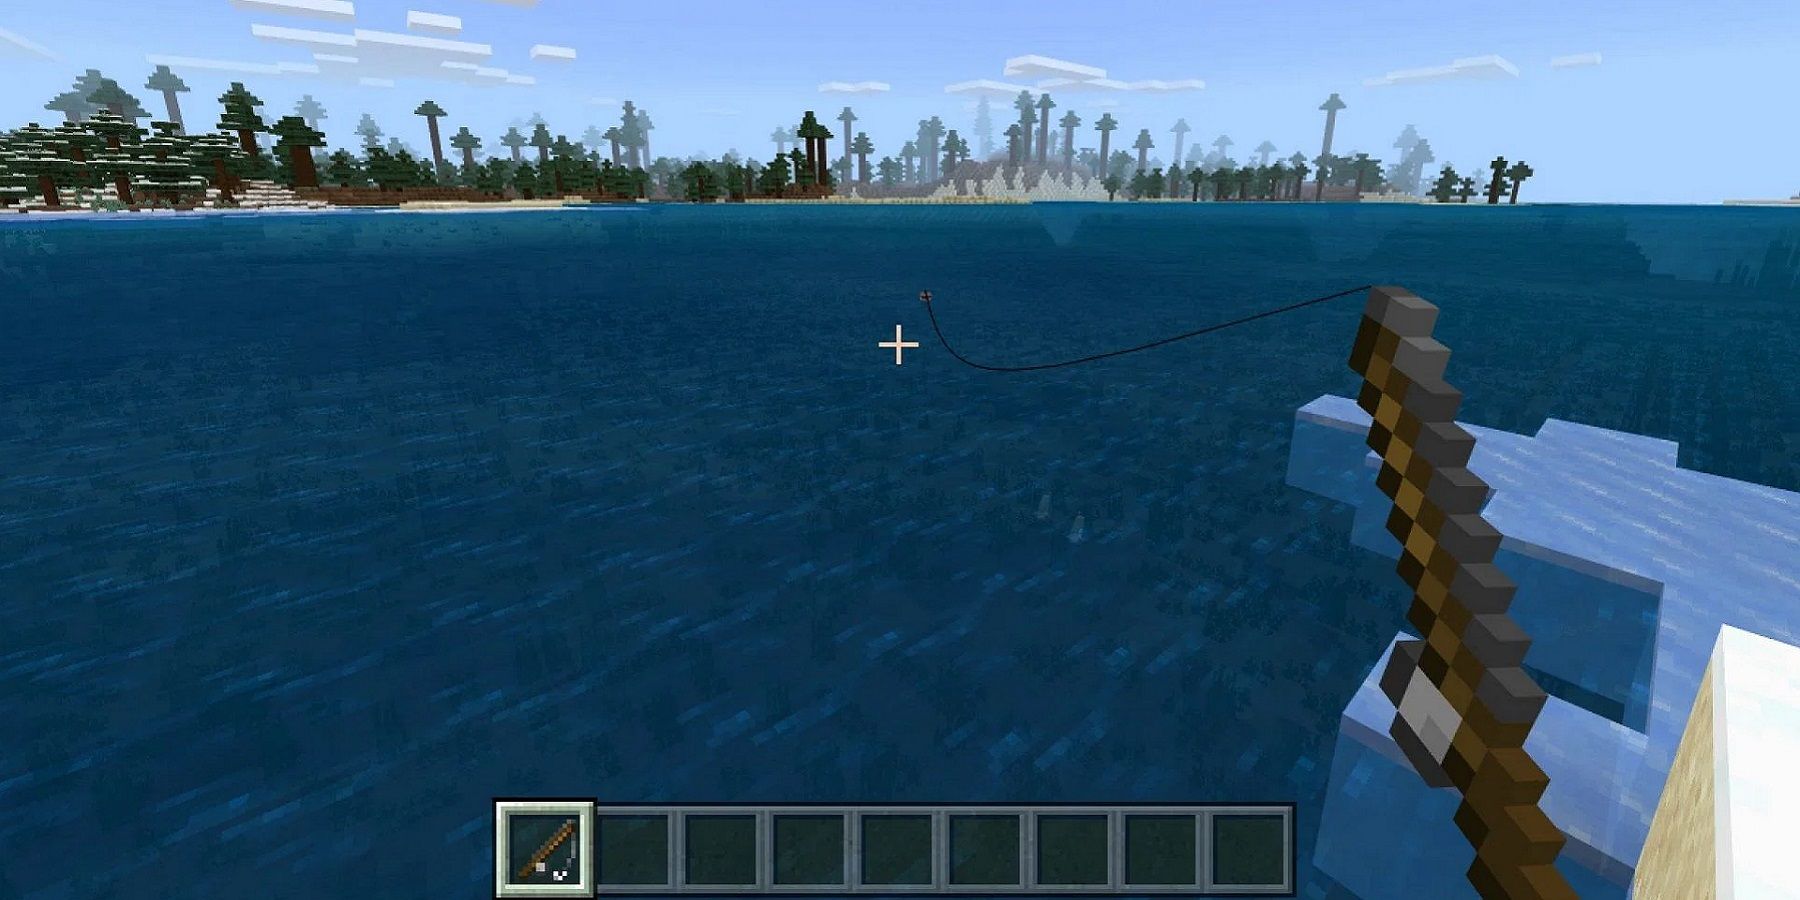 Screenshot from Minecraft showing the player fishing.